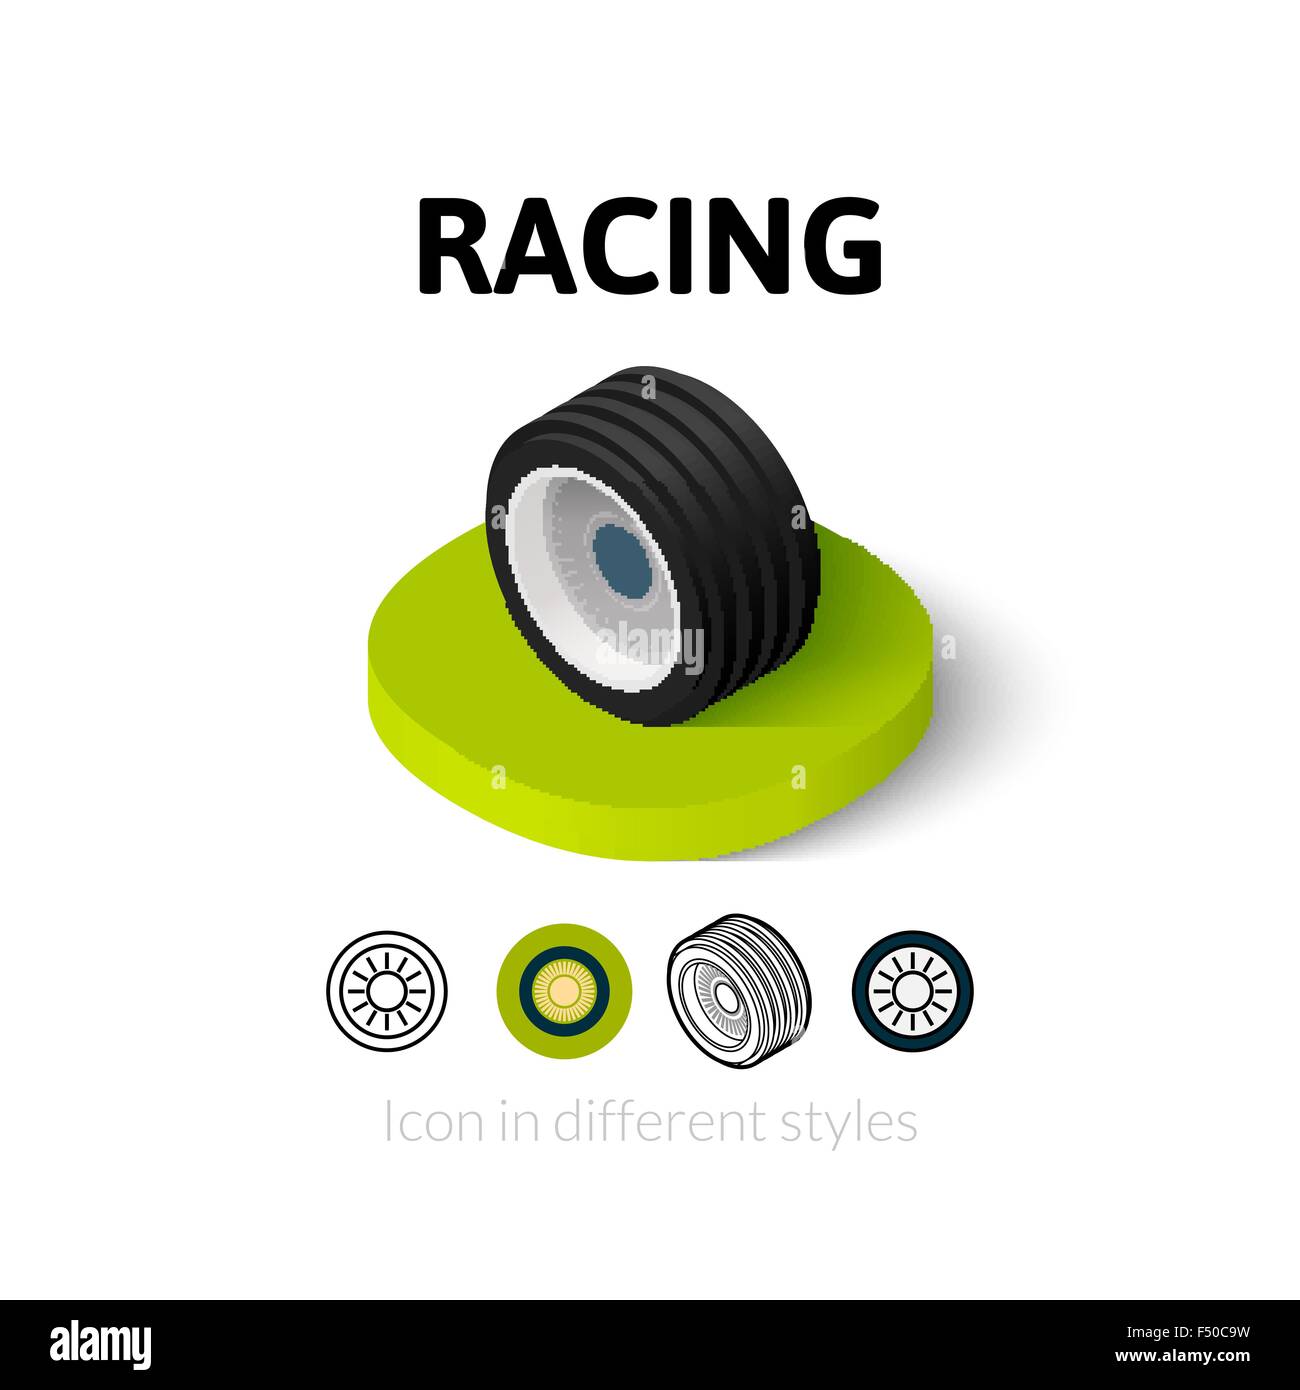 Racing icon in different style Stock Vector